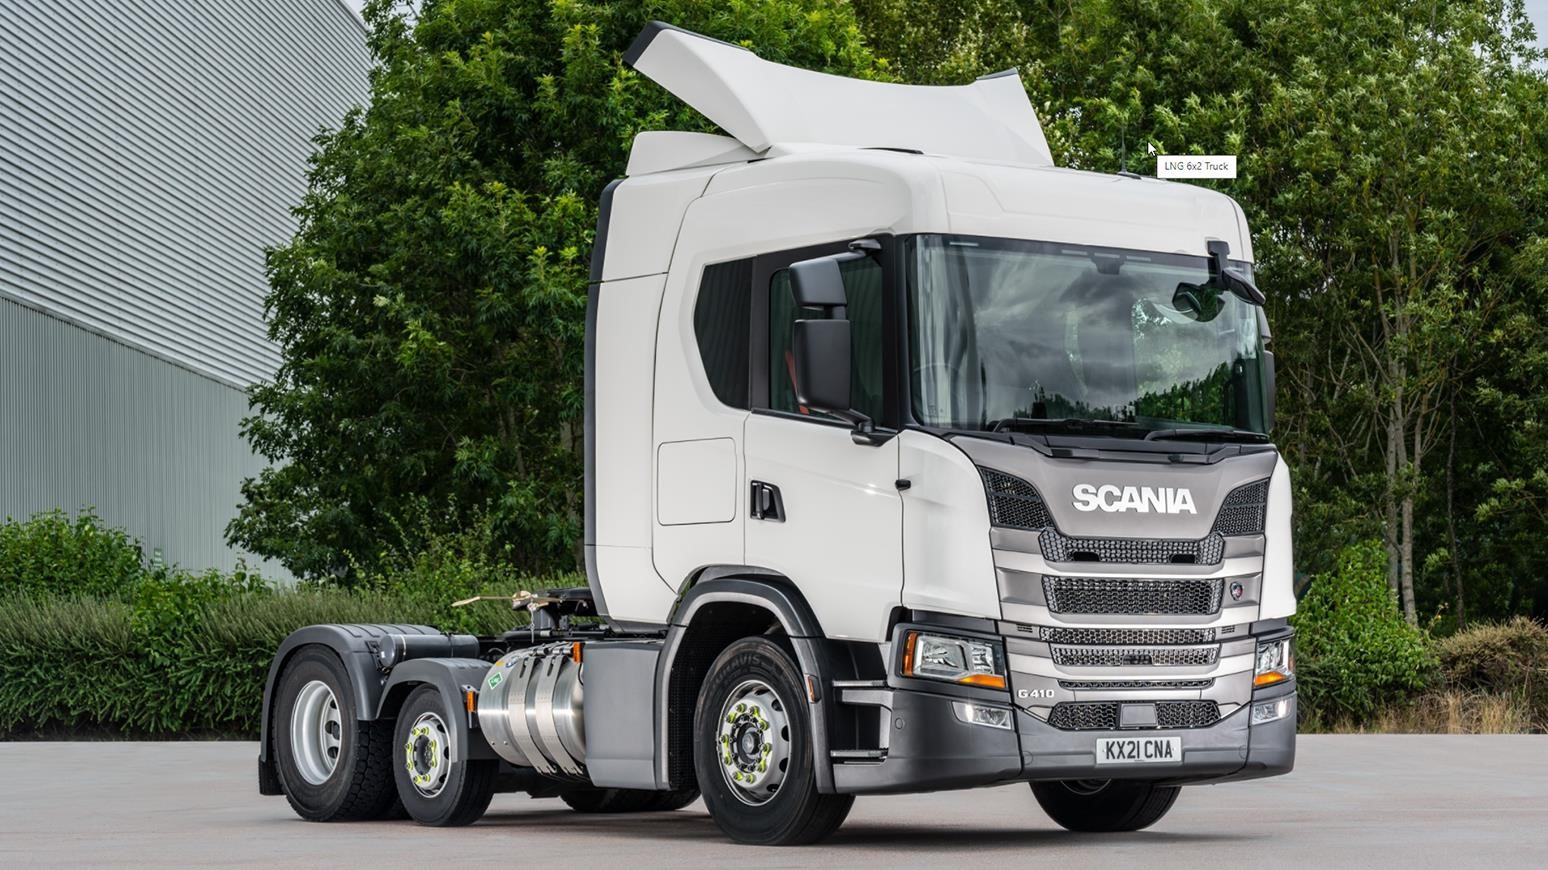 Scania Introduces Six-Wheel LNG-Powered Tractor With A Centre-Lift Axle